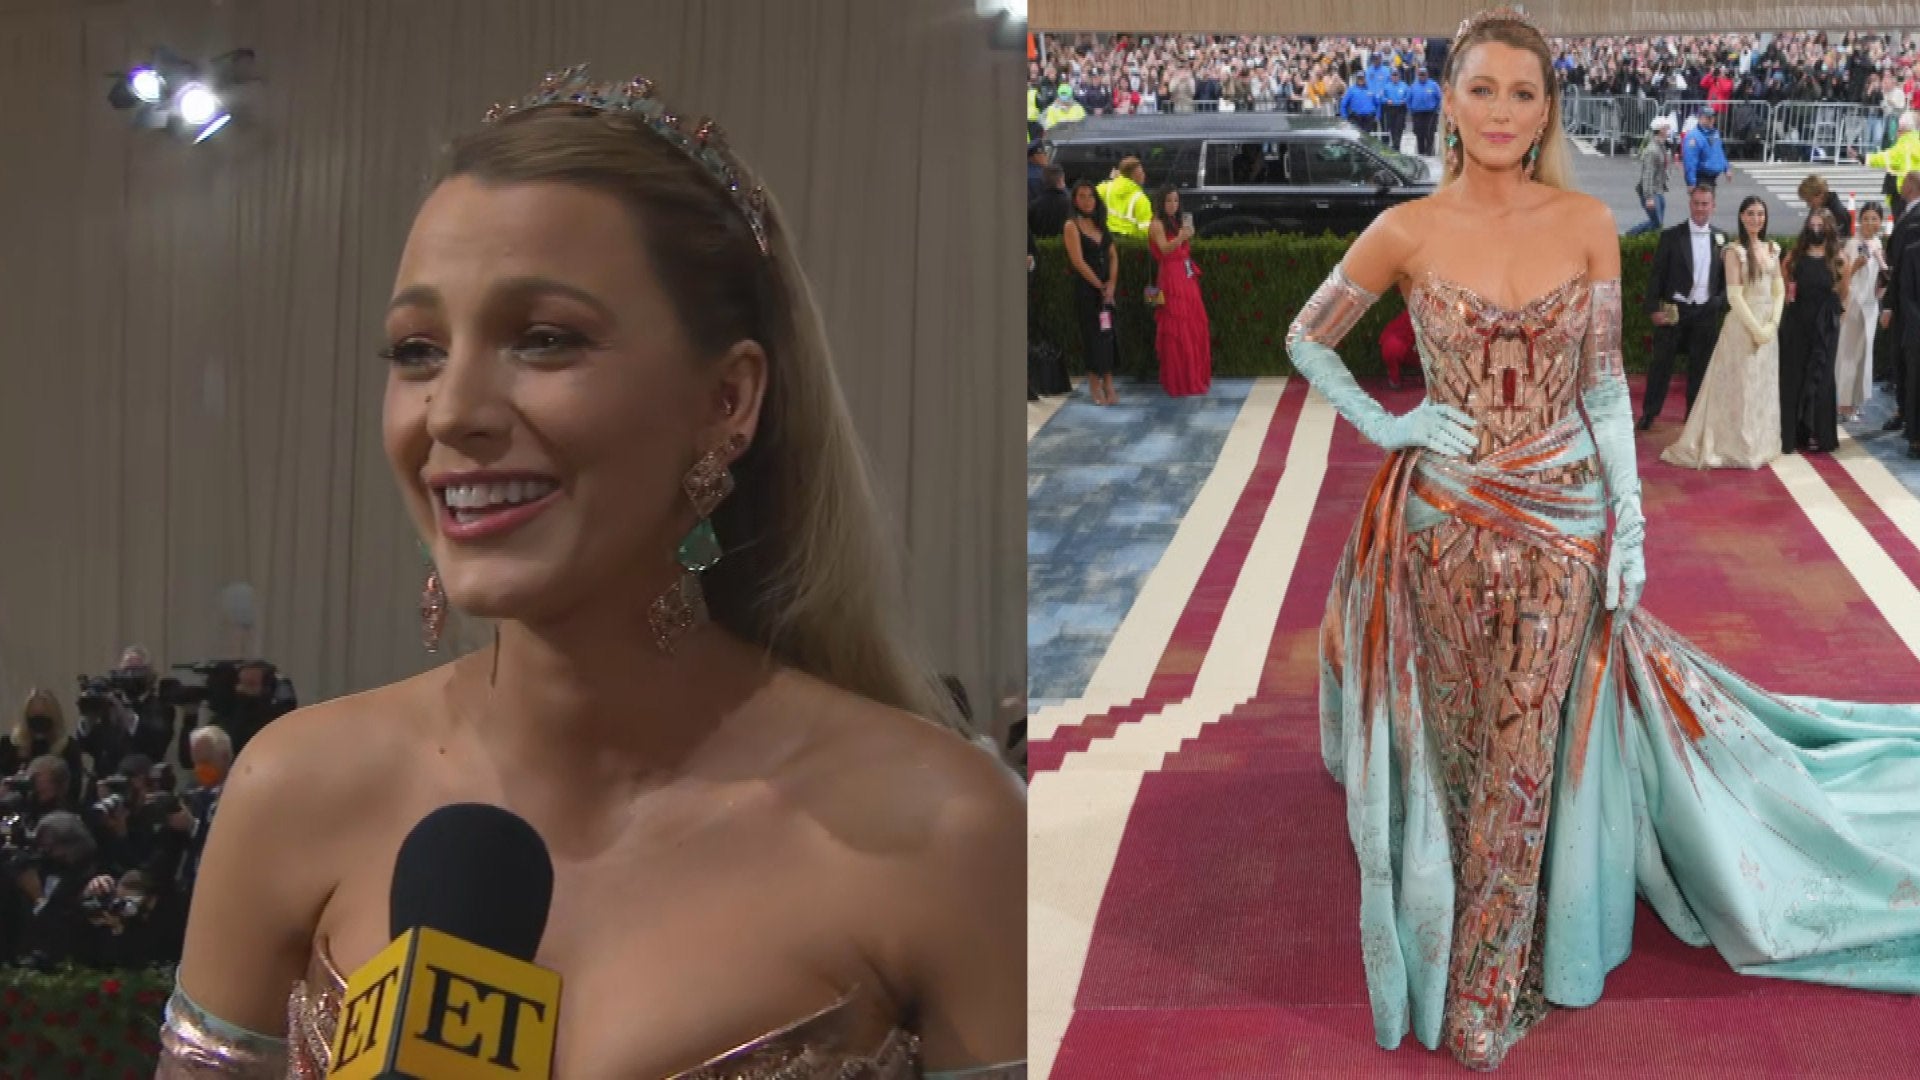 Blake Lively takes the plunge ahead of promoting A Simple Favor